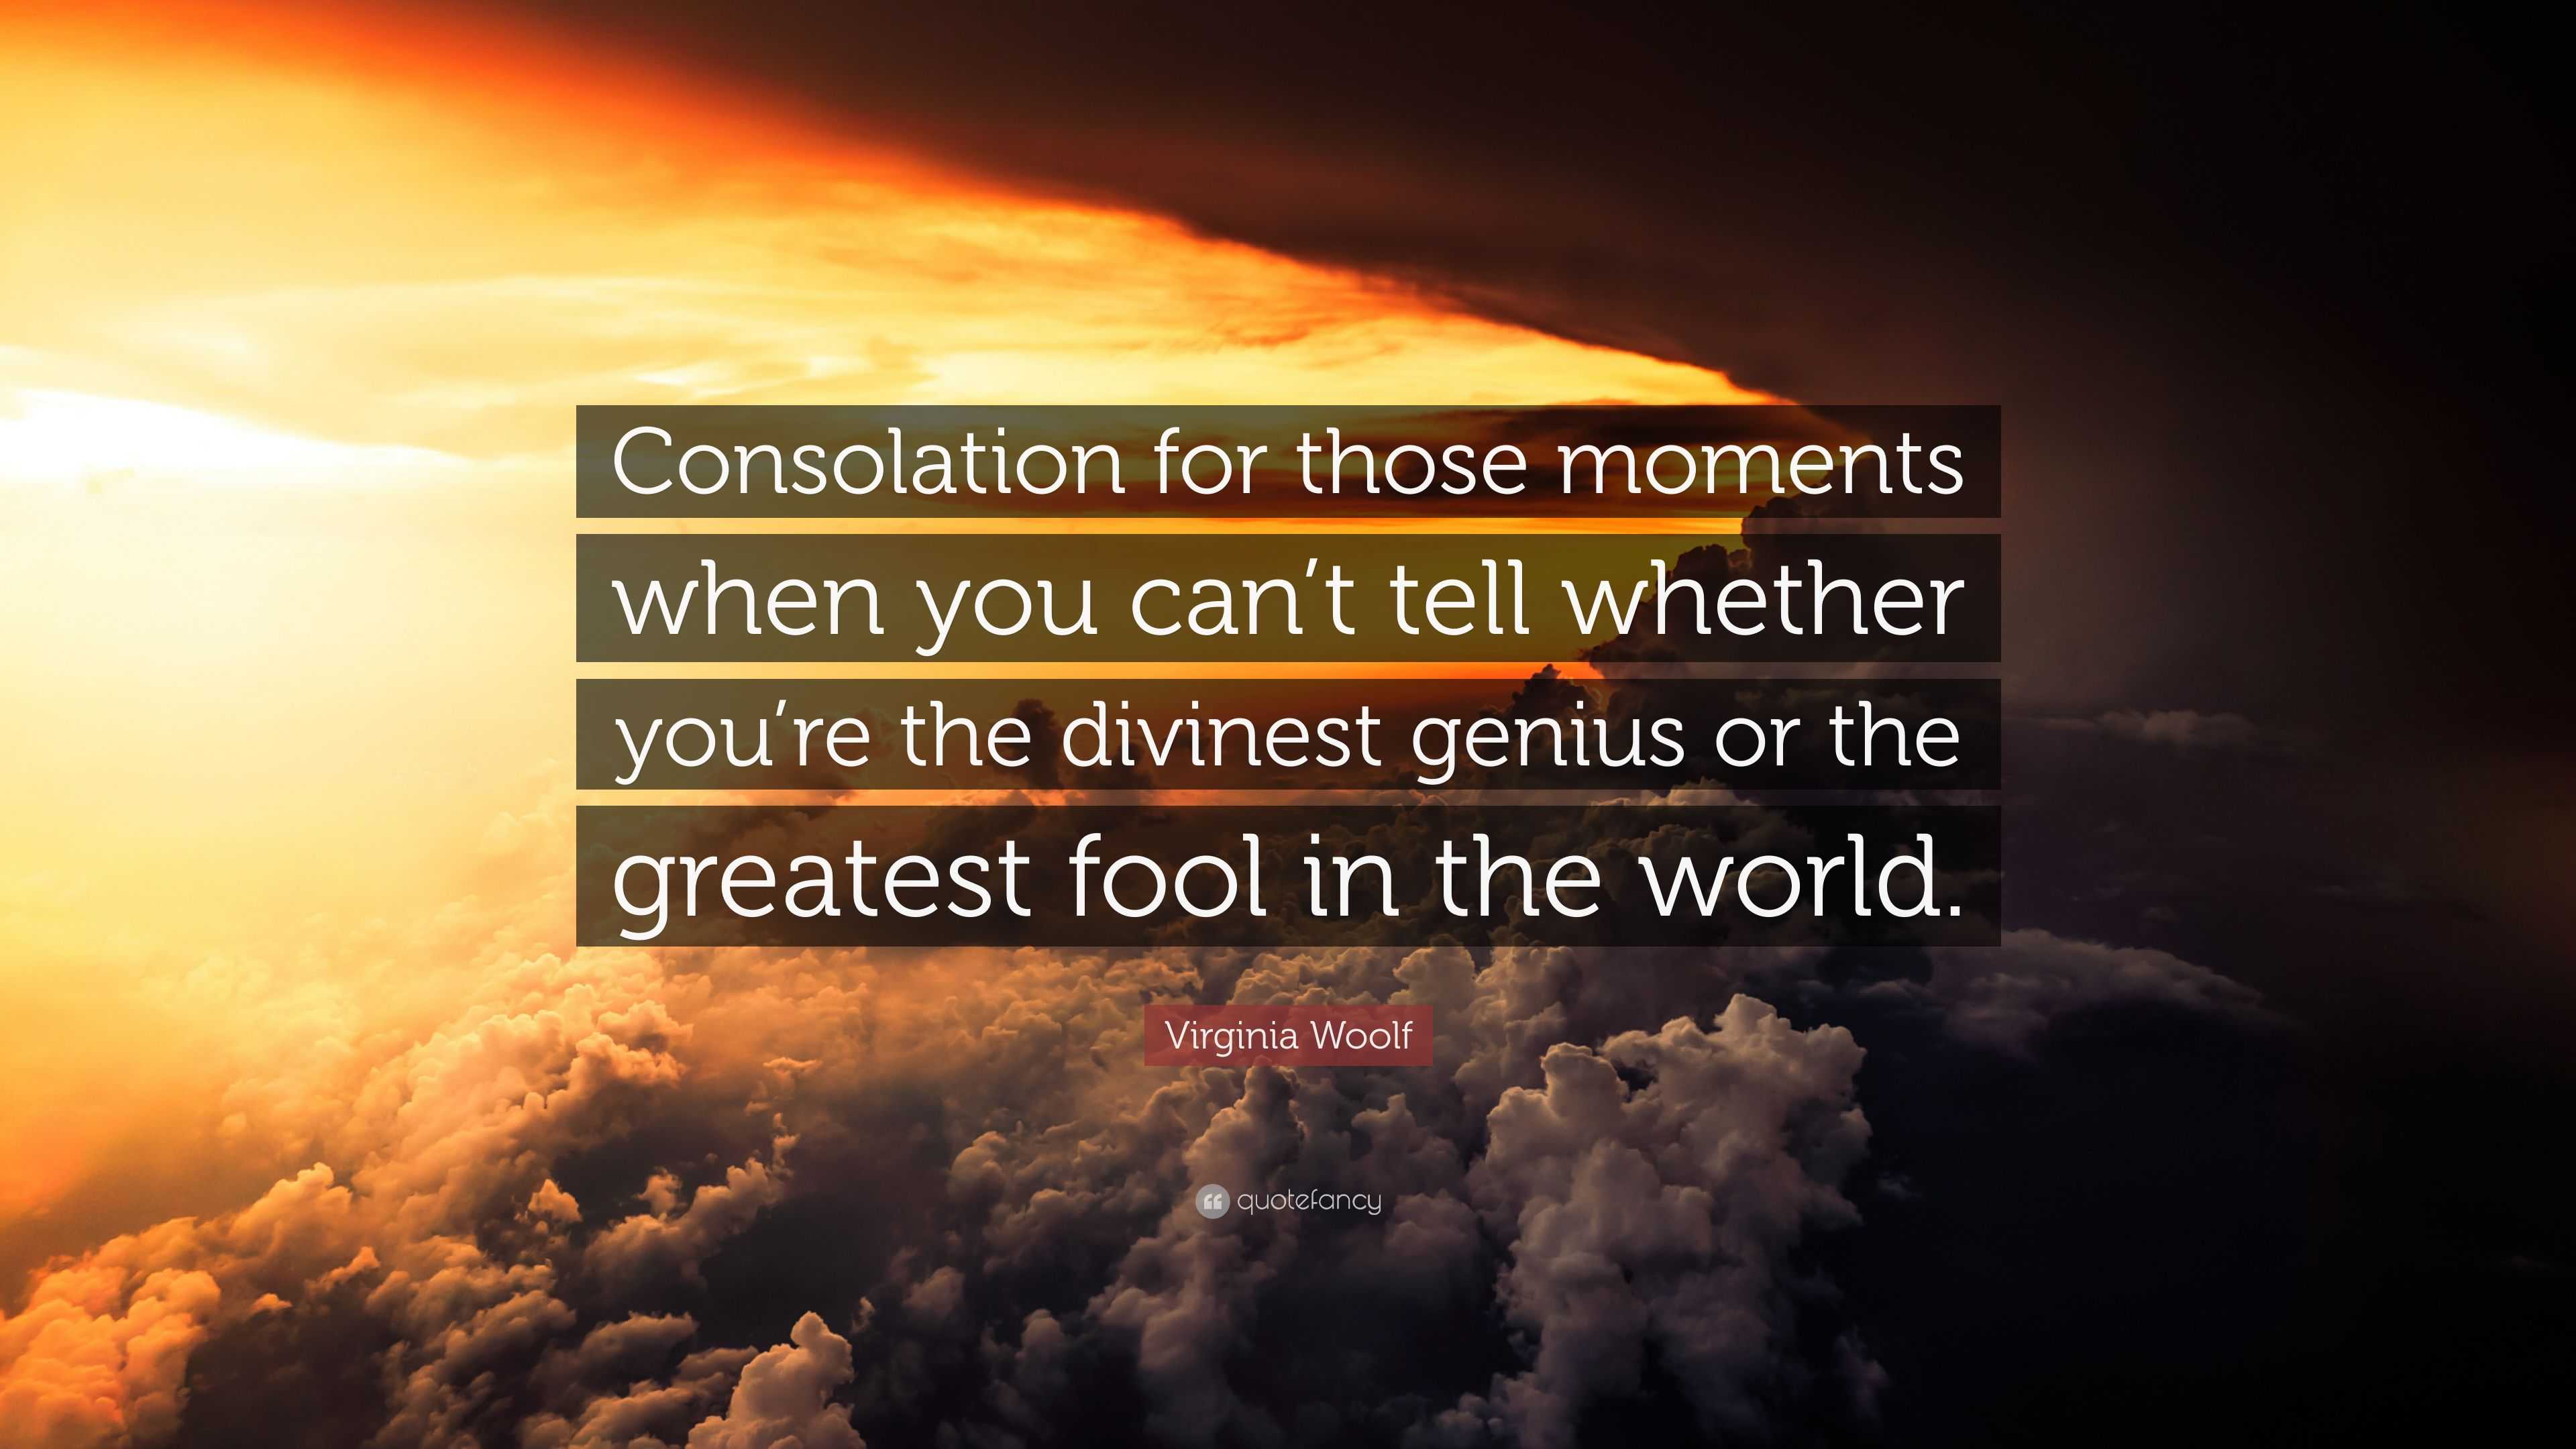 Virginia Woolf Quote: “Consolation for those moments when you can’t ...